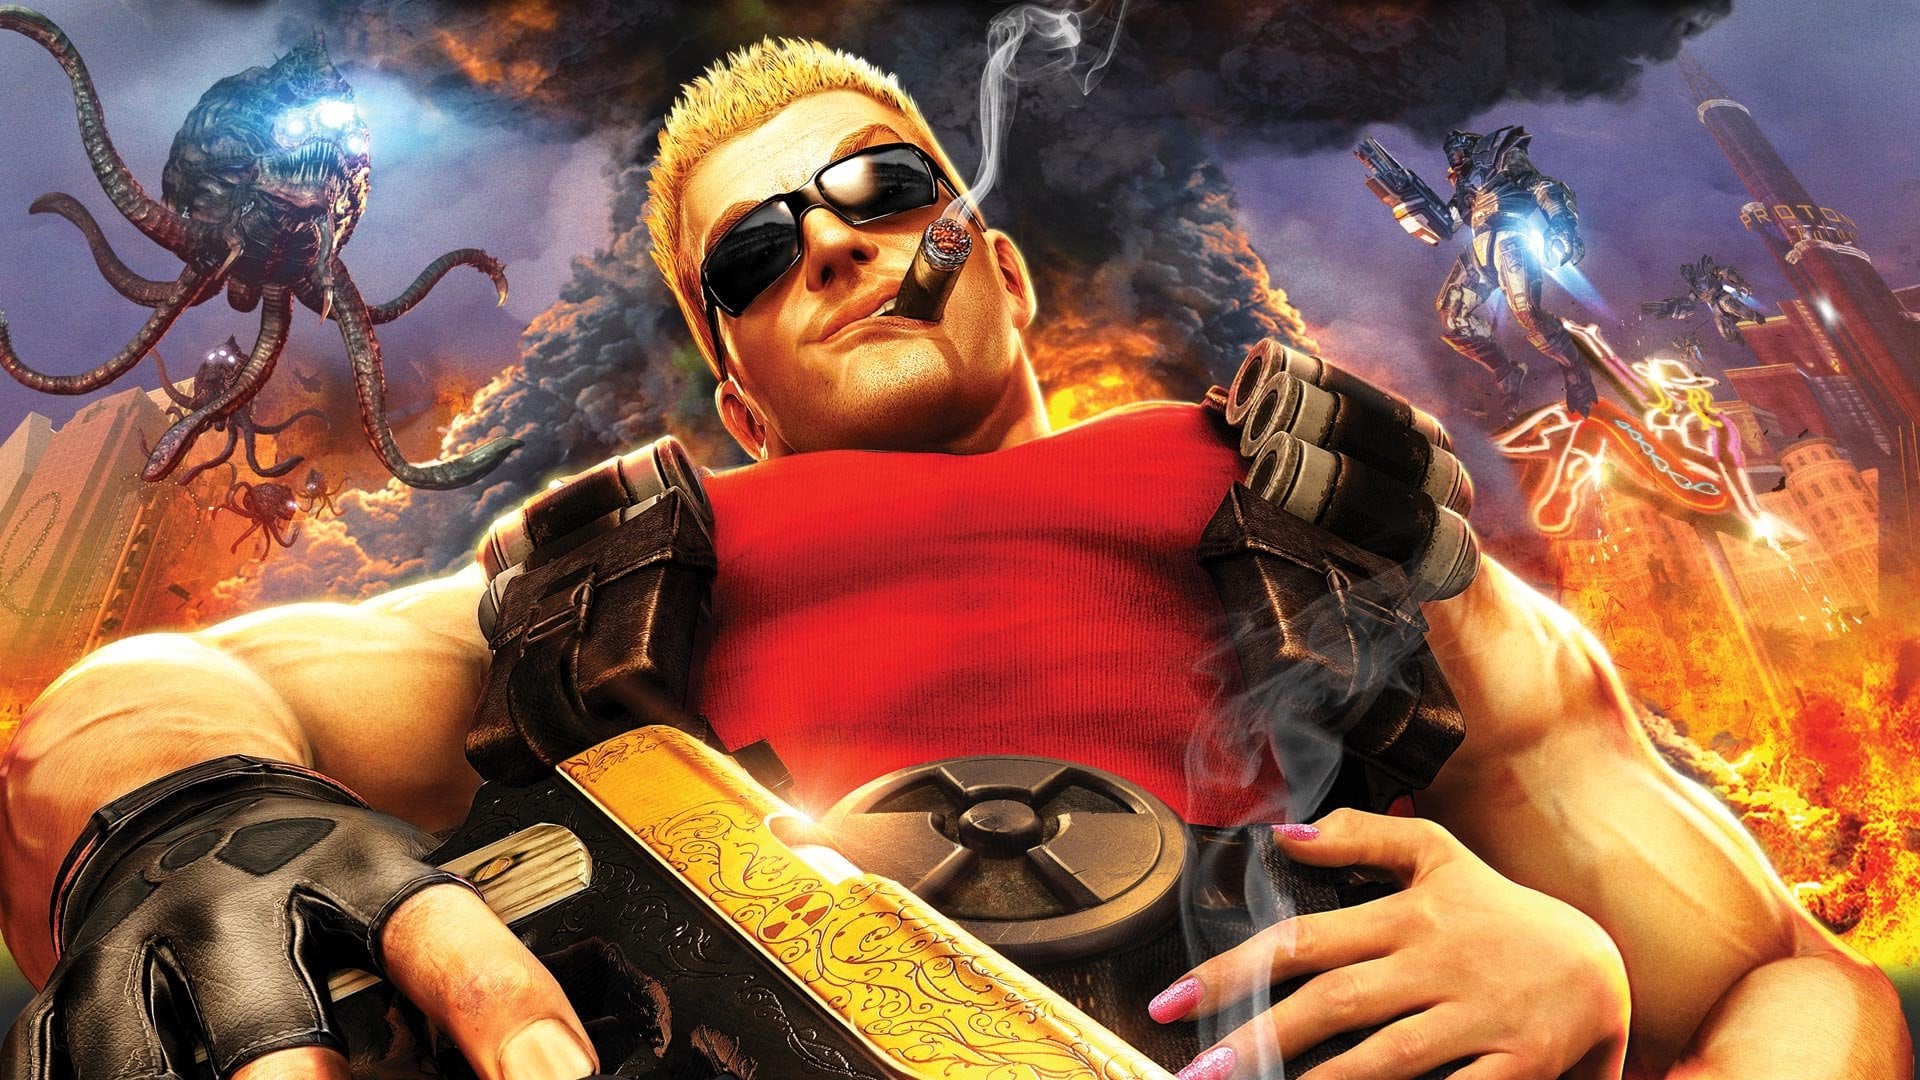 The Story of Duke Nukem Lessons Learned from a Failed 12 Year Project - Startup Insights Hub